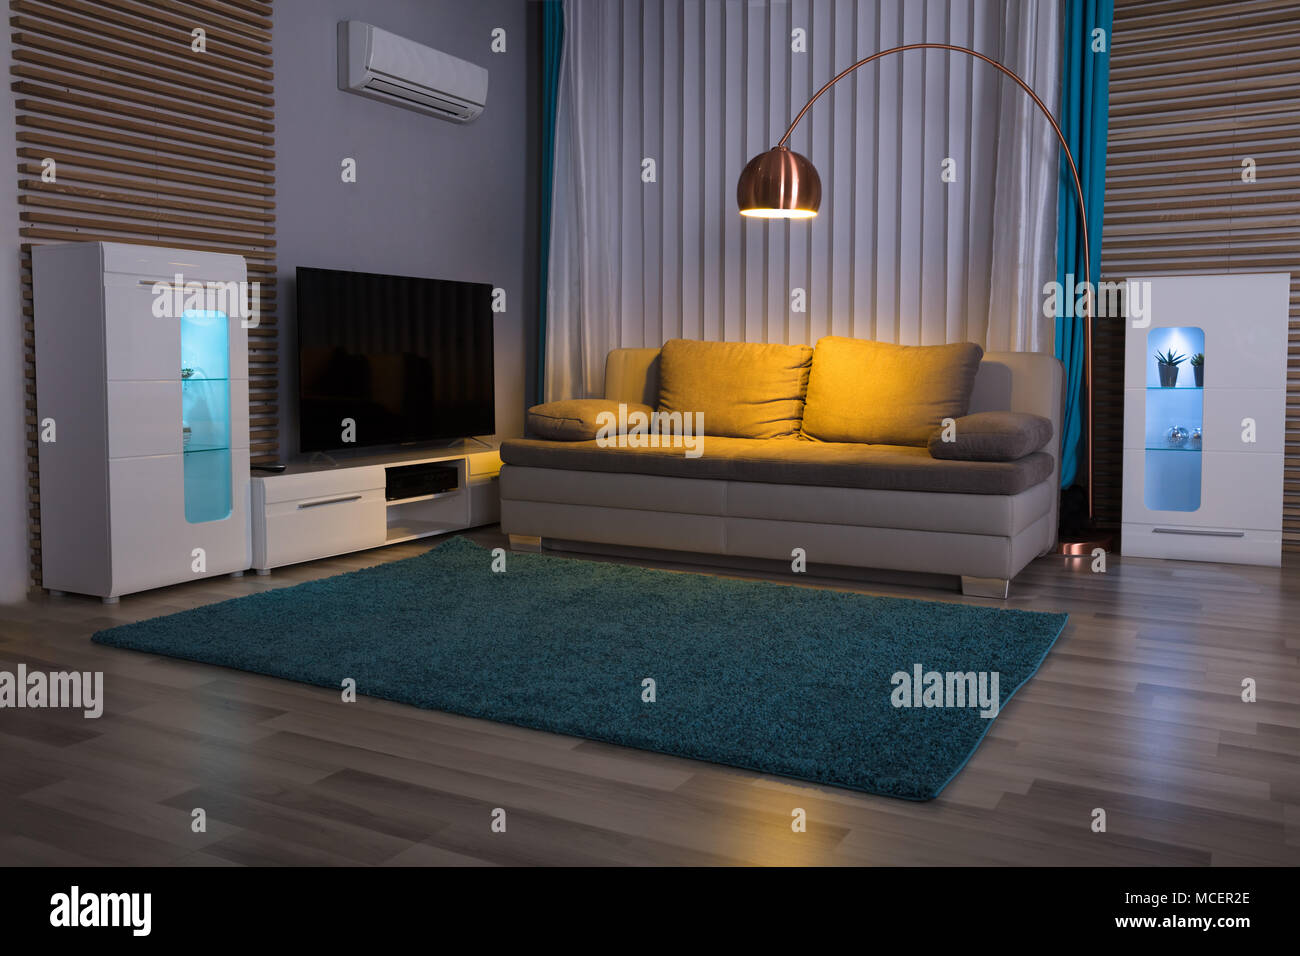 Illuminated Electric Light With Couch And Television In Living Room Stock Photo